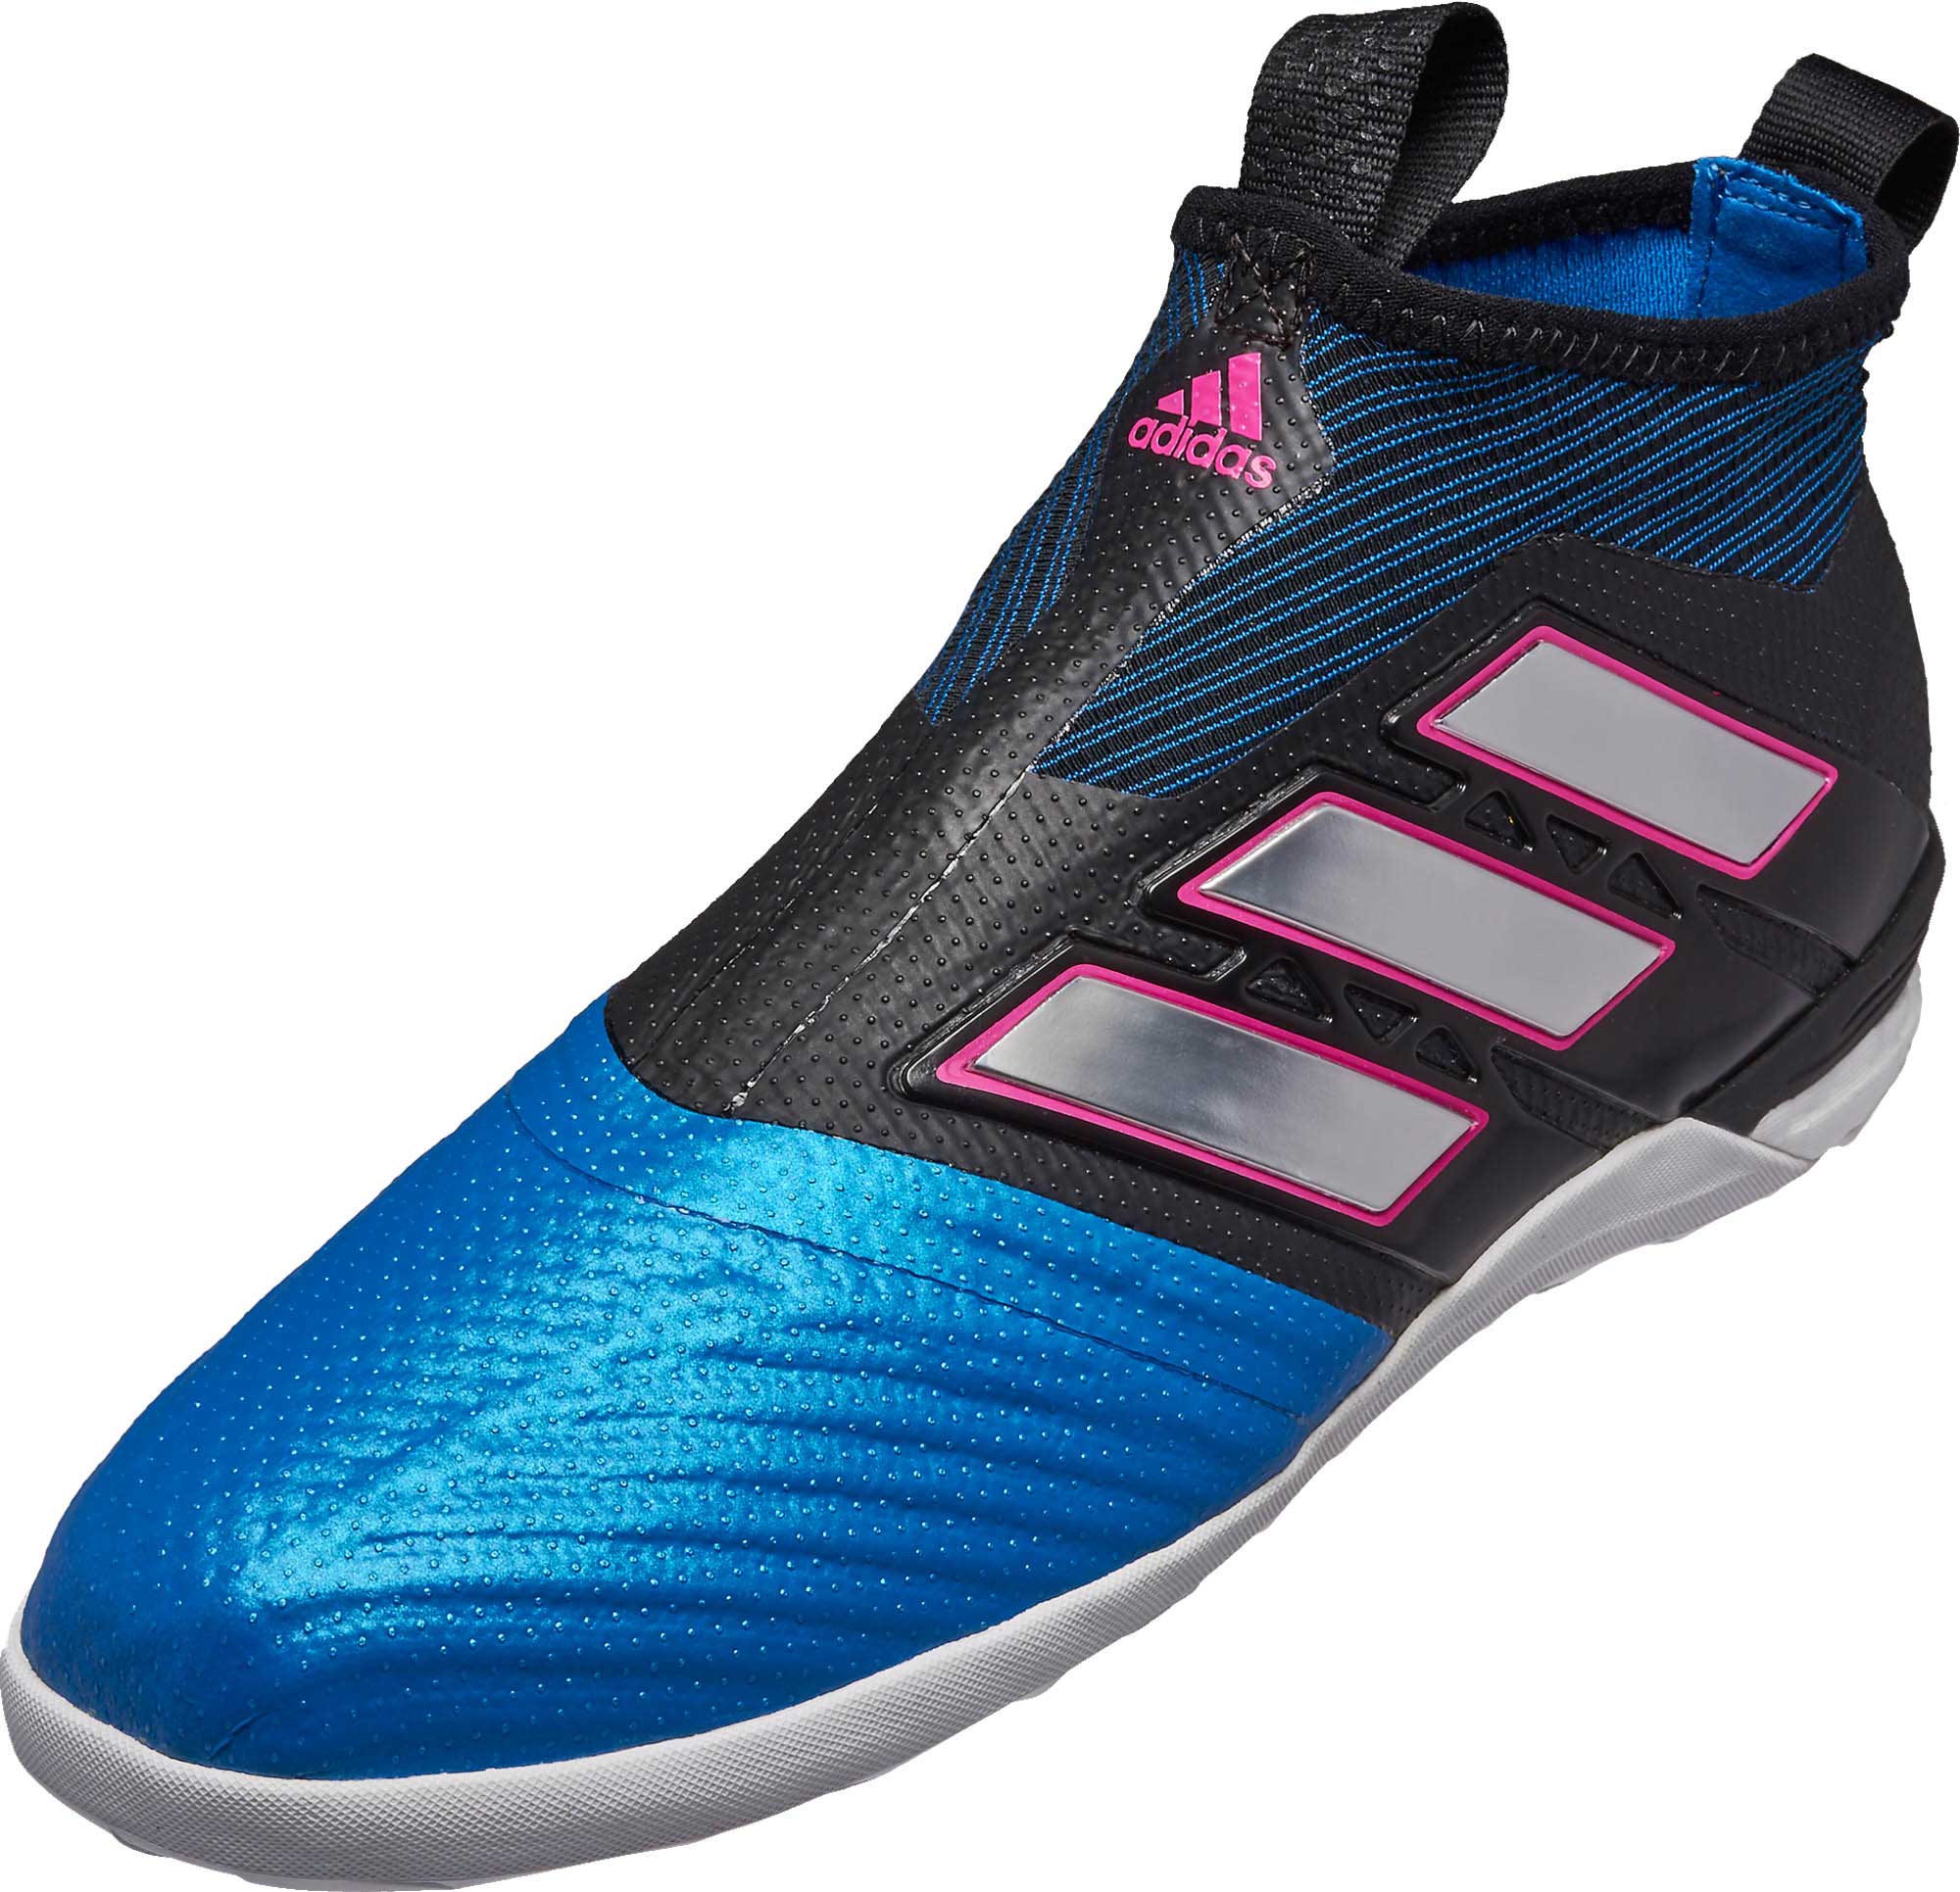 adidas ace indoor soccer shoes